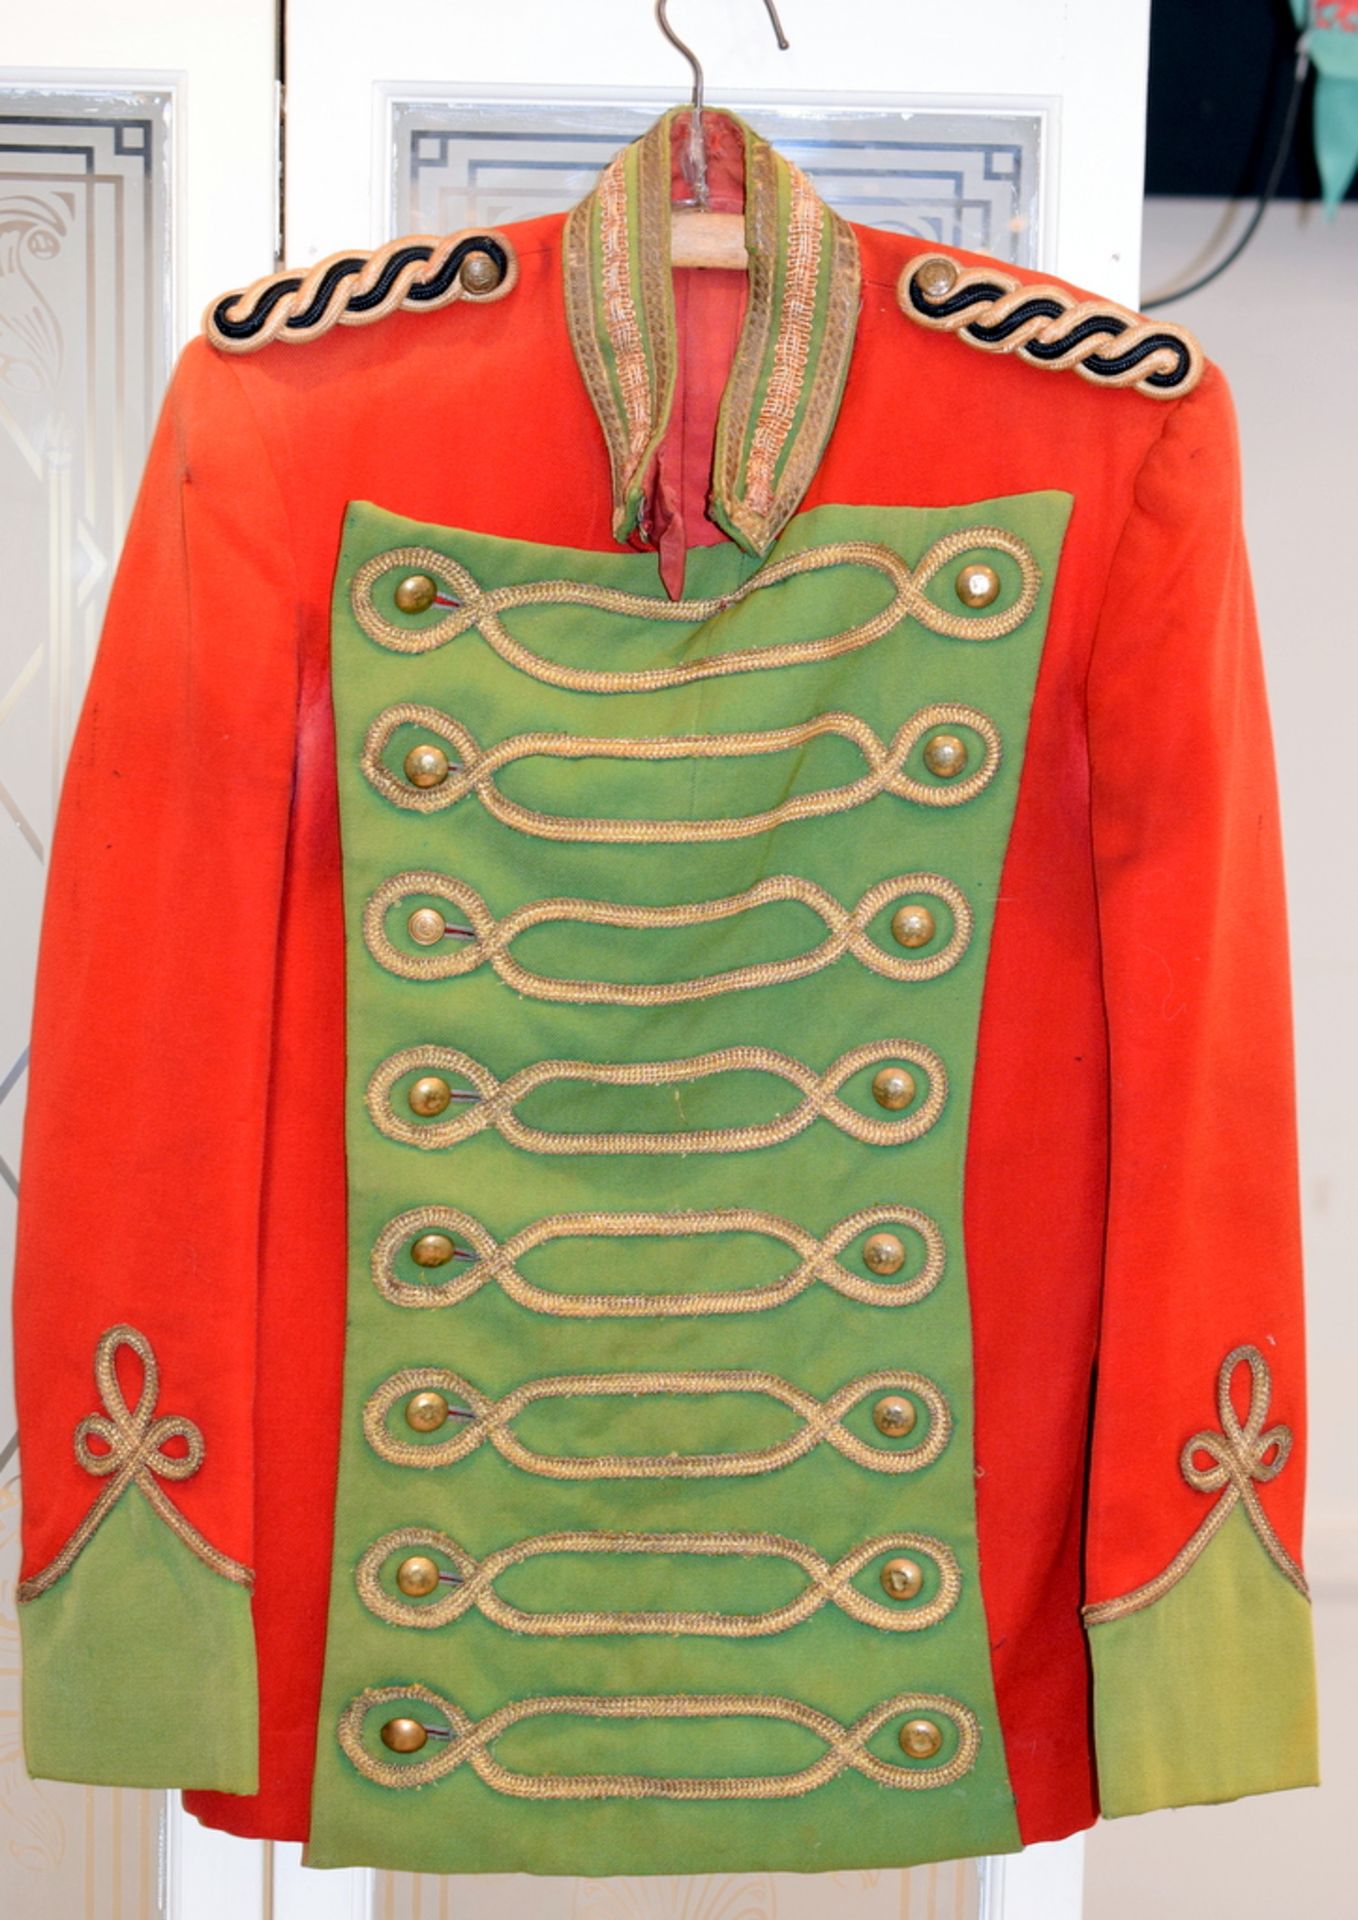 Antique Military Jacket In Red With Green Panelling c1840/60s